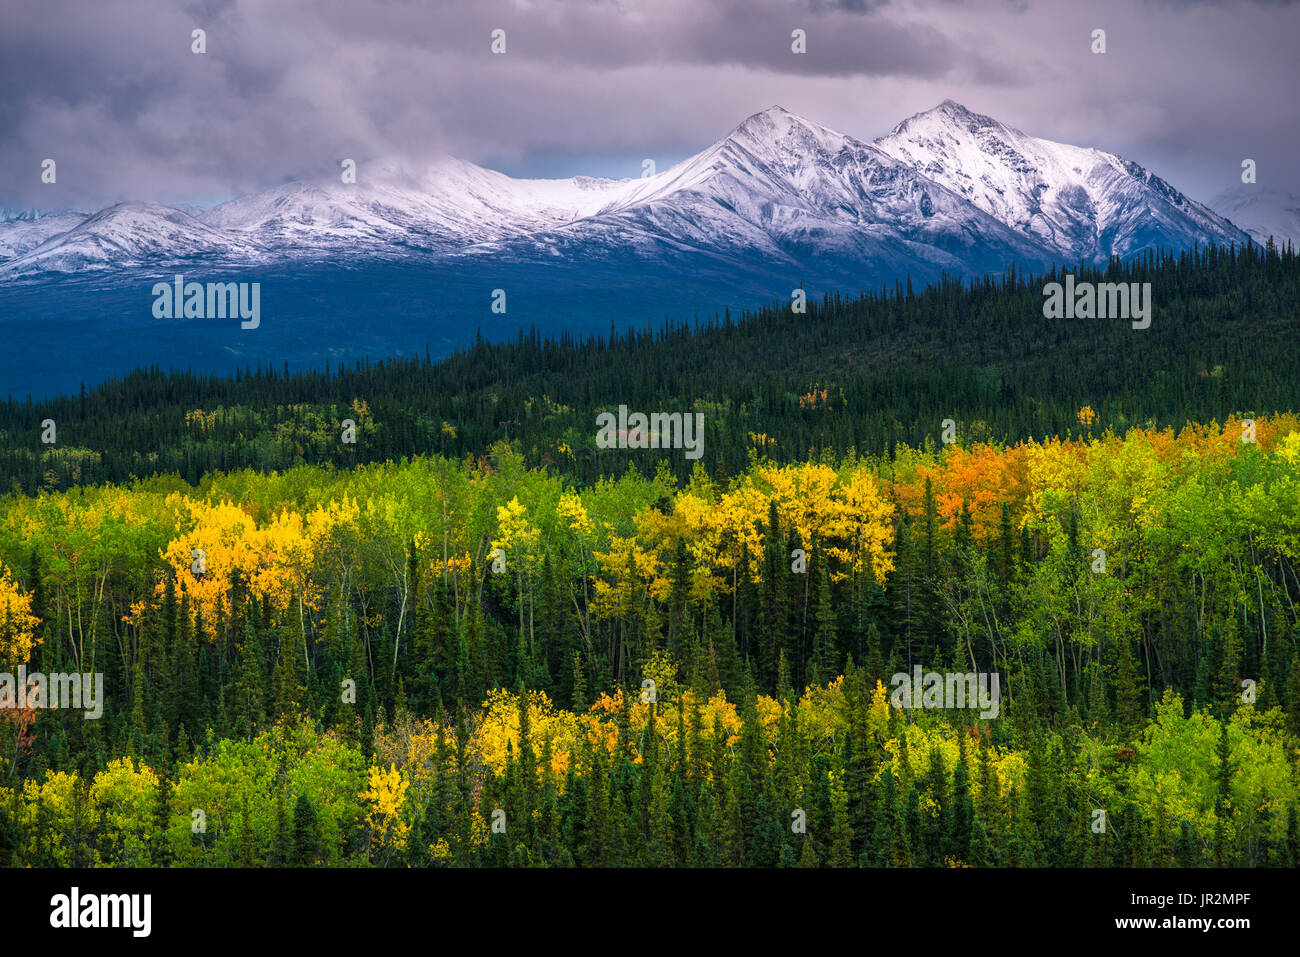 Scenic View Of An Early Snowfall On Alaska Range Foothills With Autumn Foliage In The Foreground, Denali National Park, Interior Alaska, USA Stock Photo